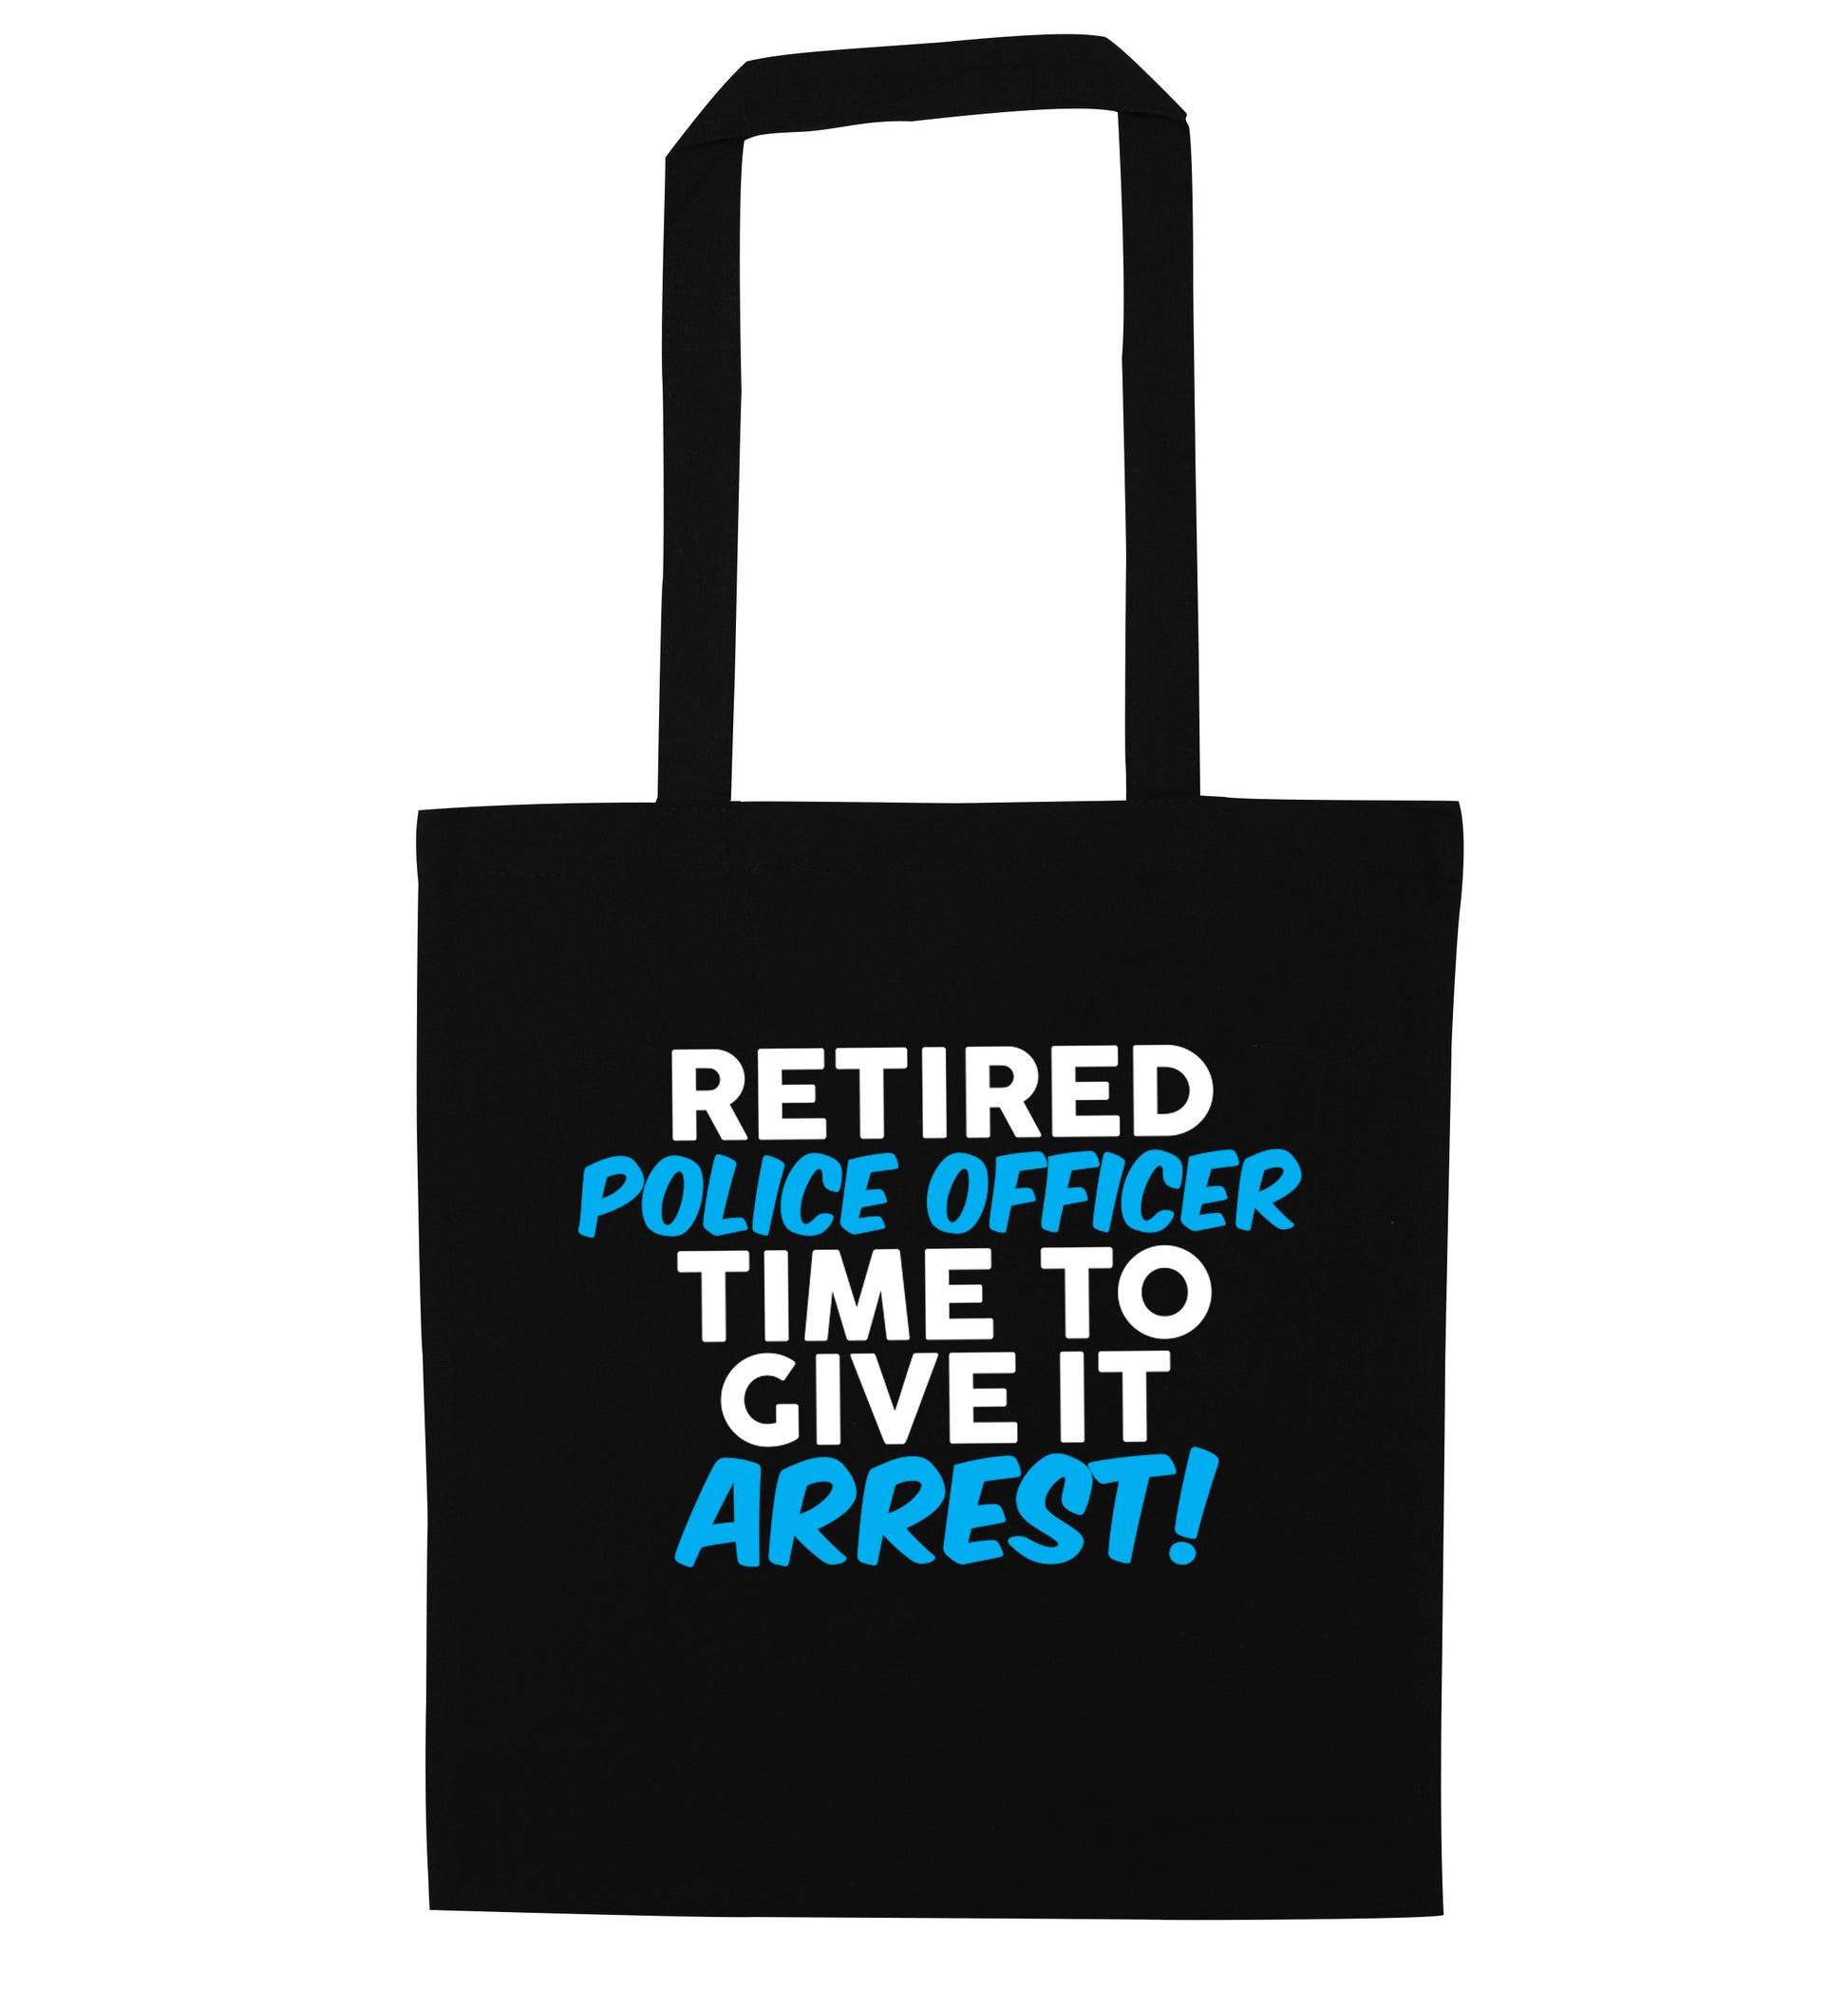 Retired police officer time to give it arrest black tote bag